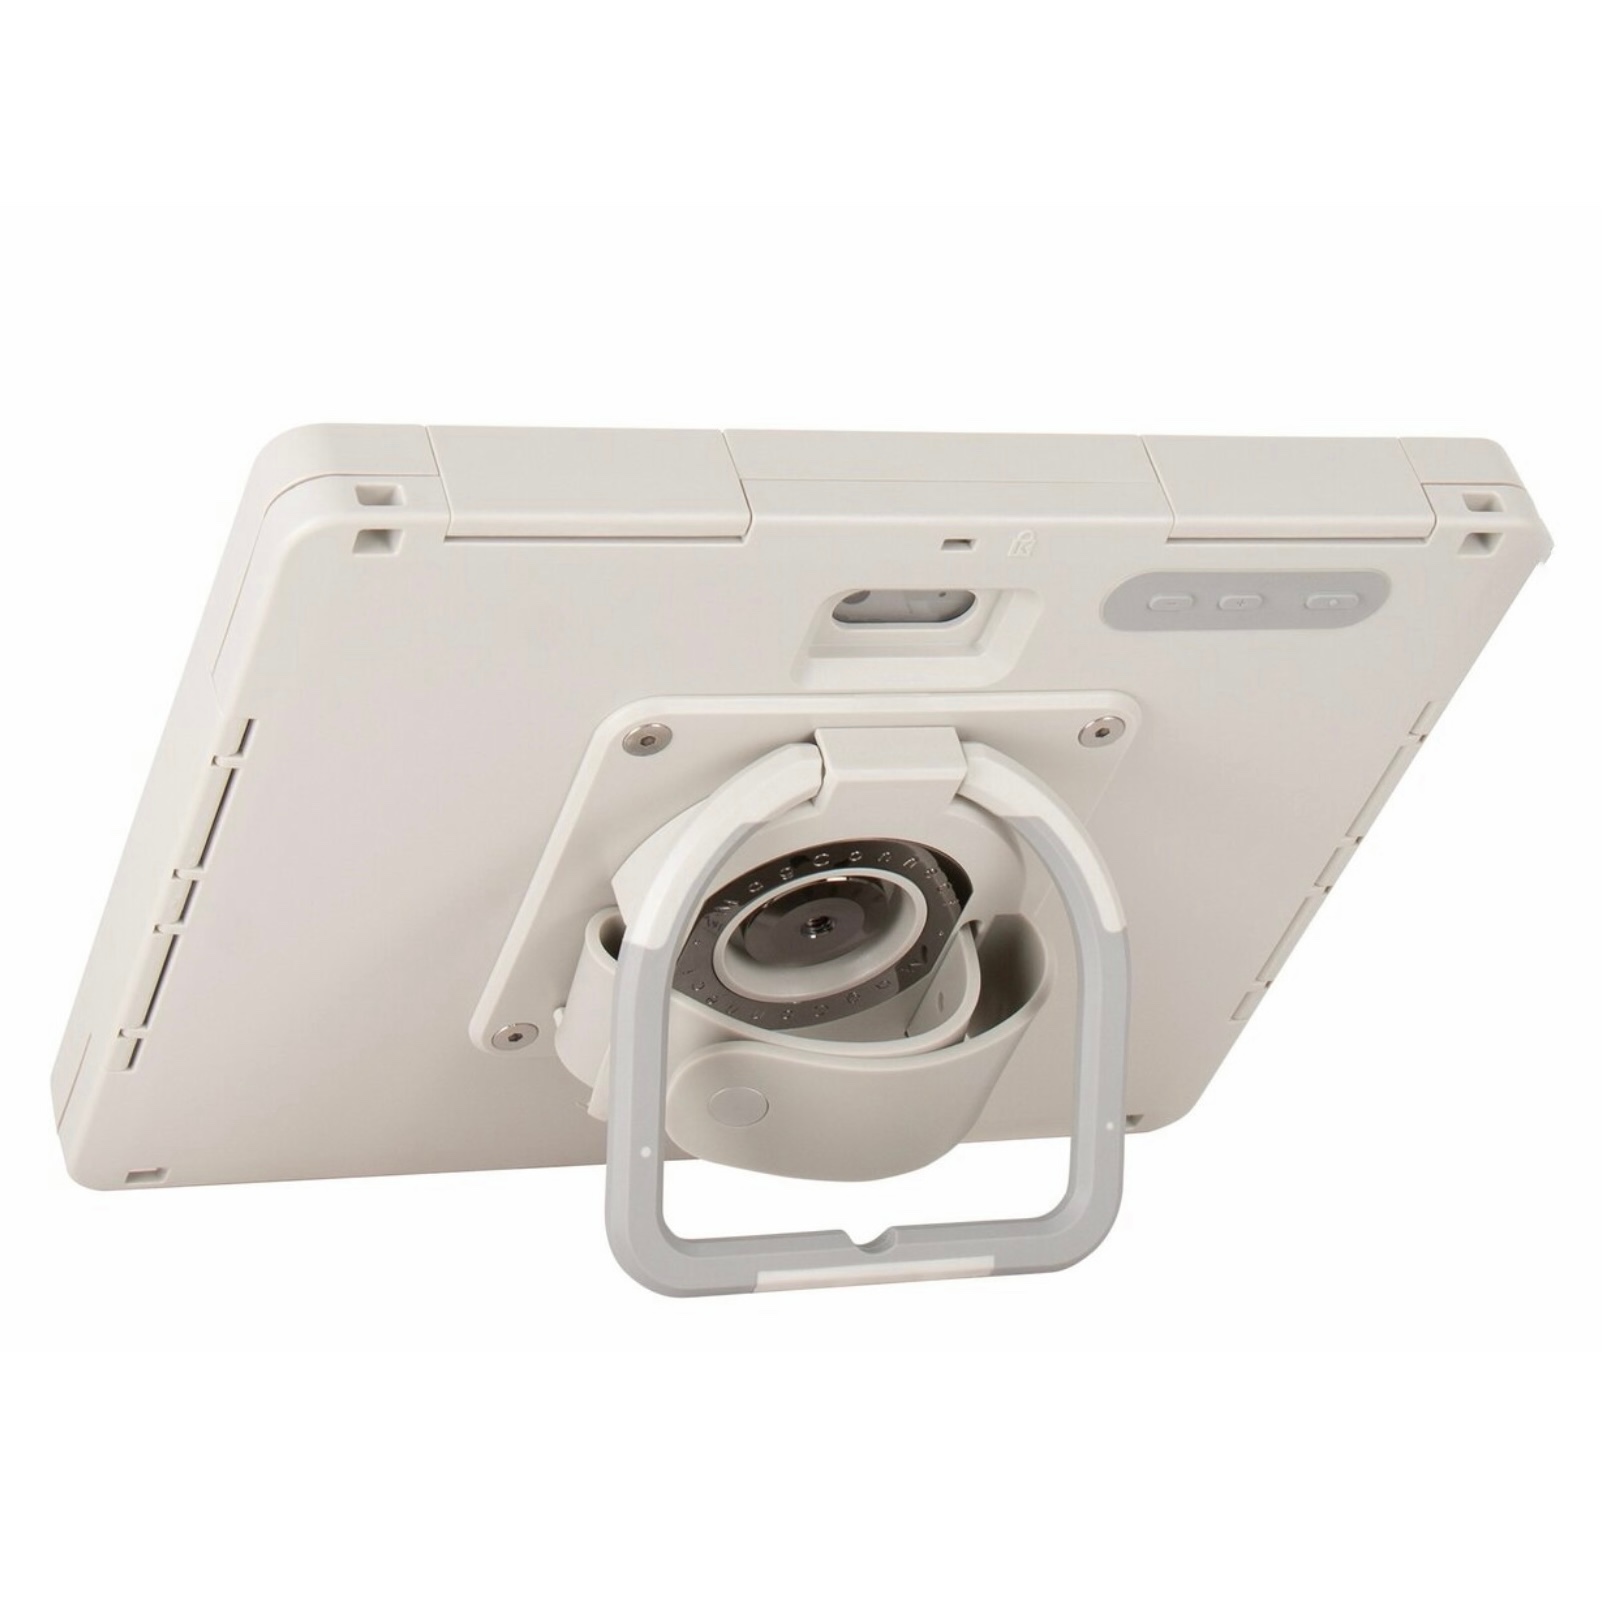 REF 2847 Protection Etanche iP68 Microsoft Surface GO 3 10.5 Water Connect